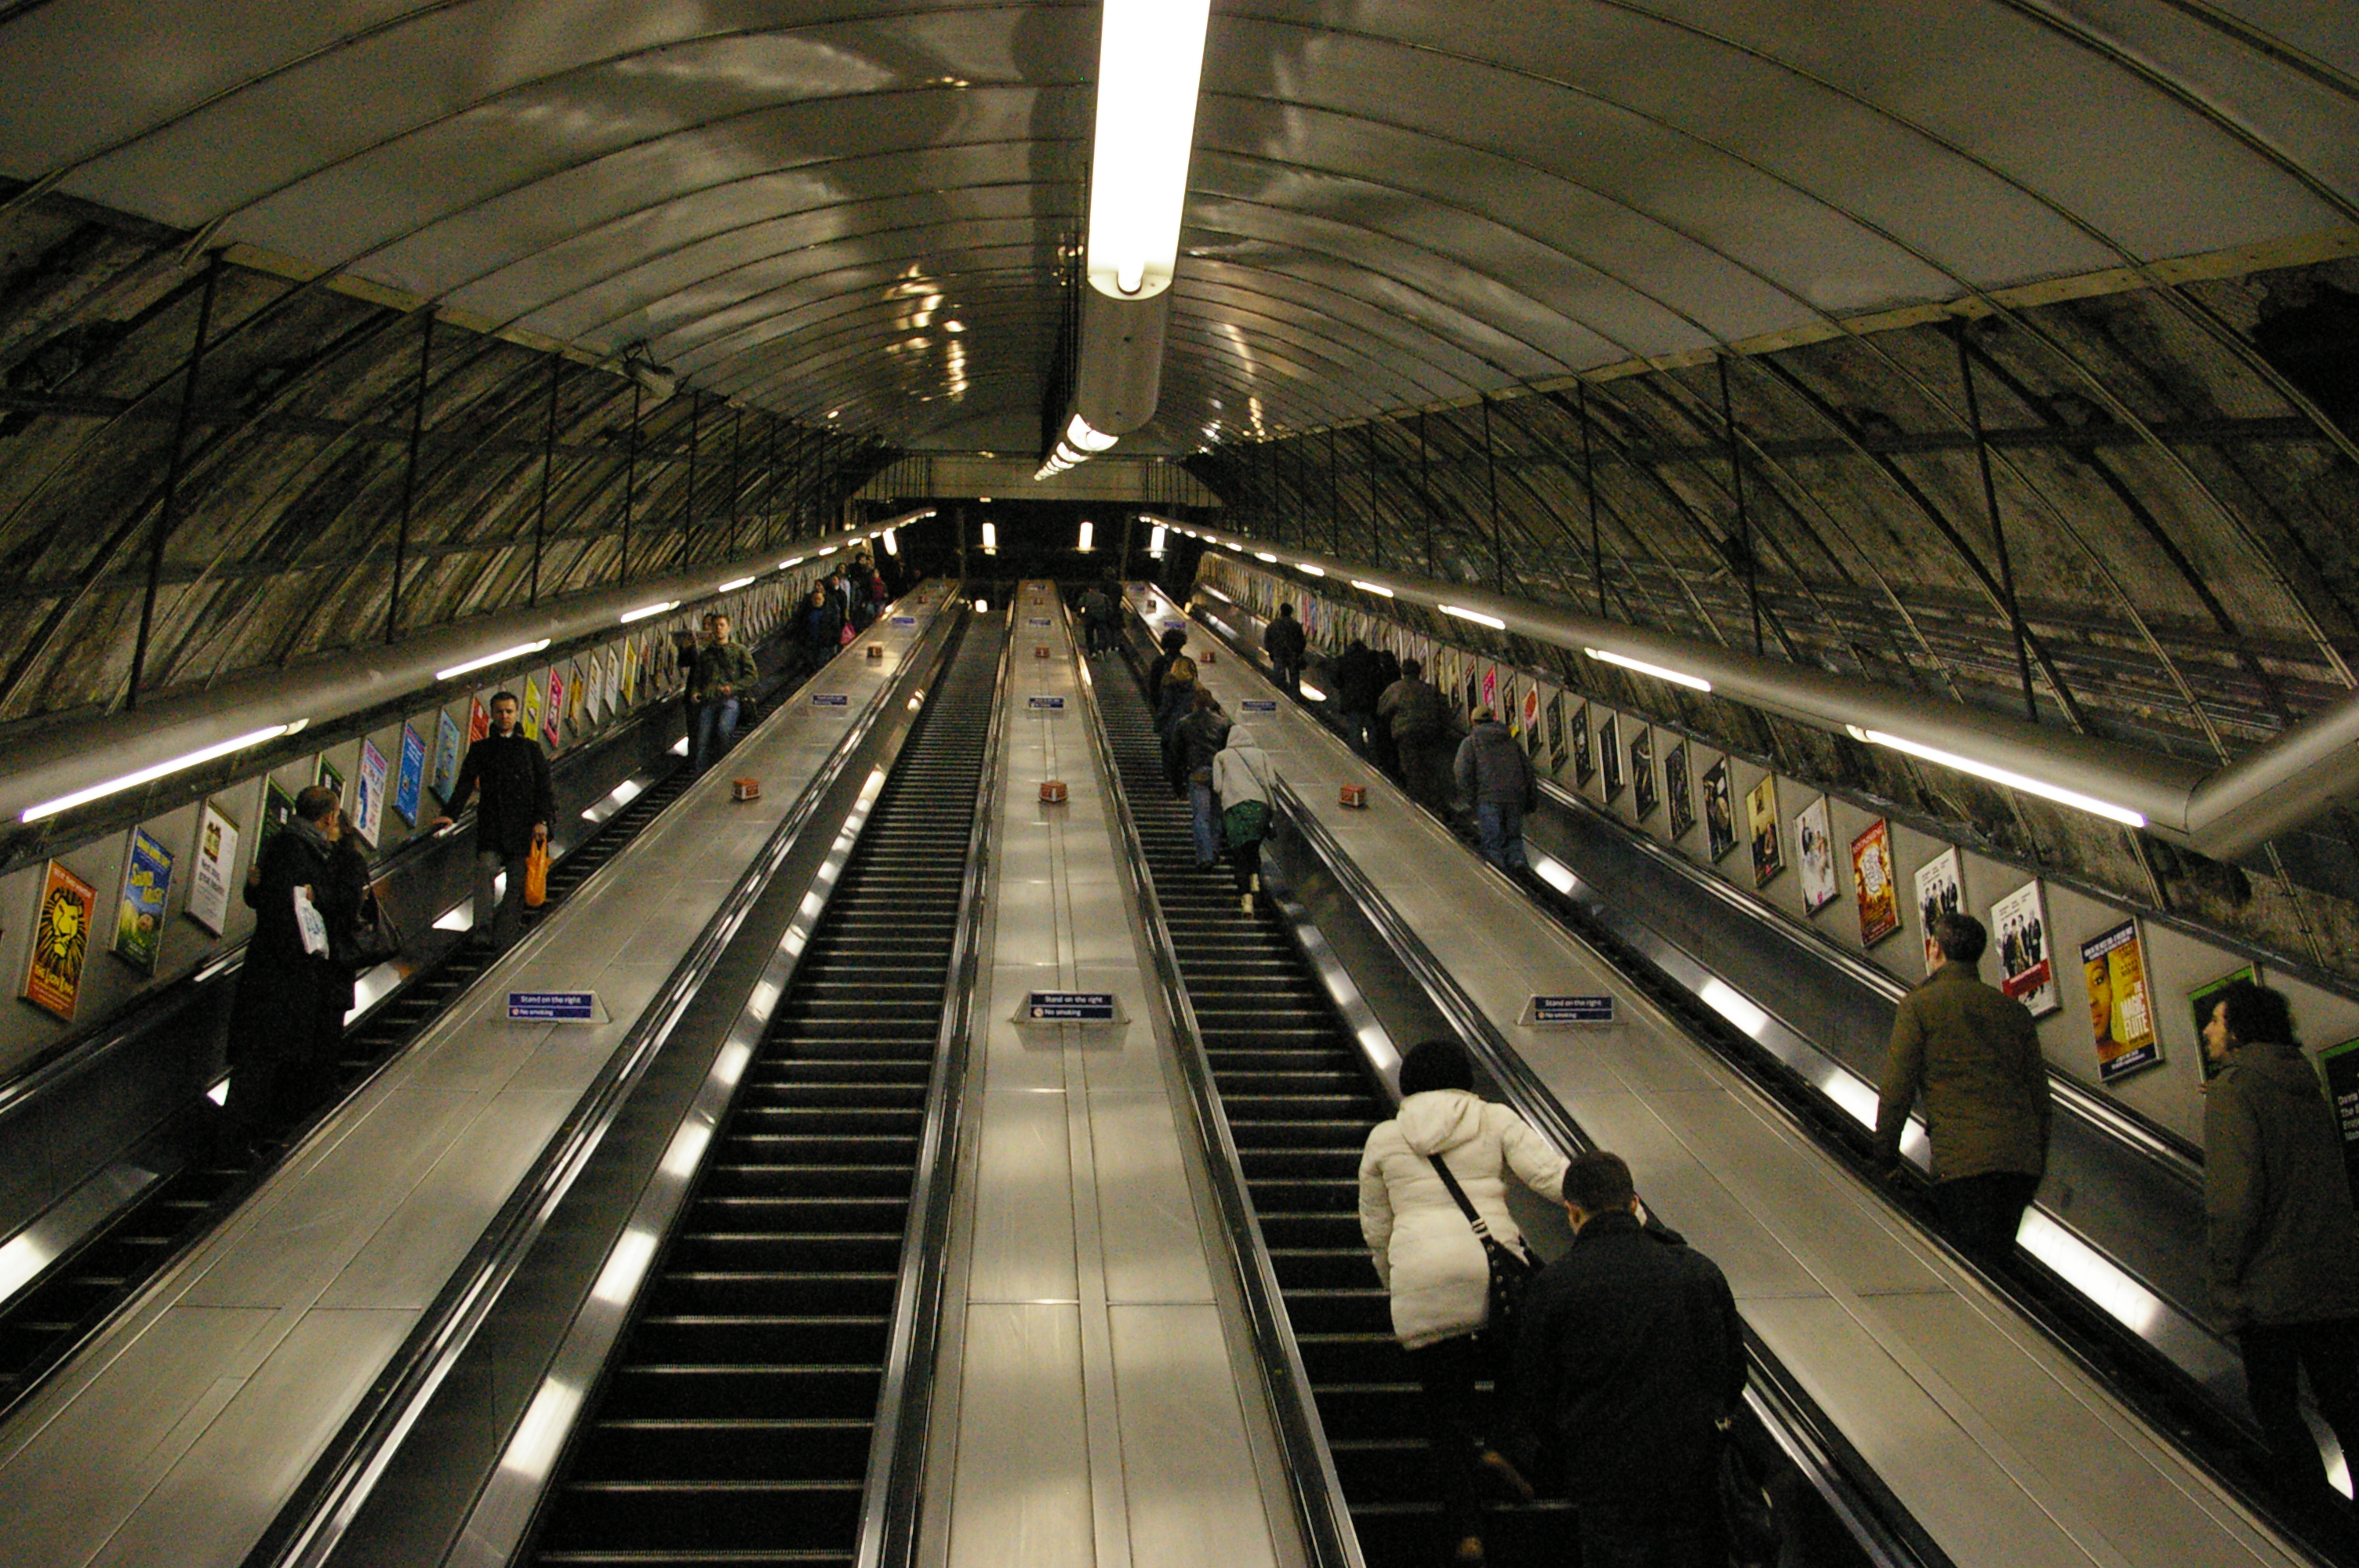 Should You Walk or Stand on the Escalator? - KineSophy